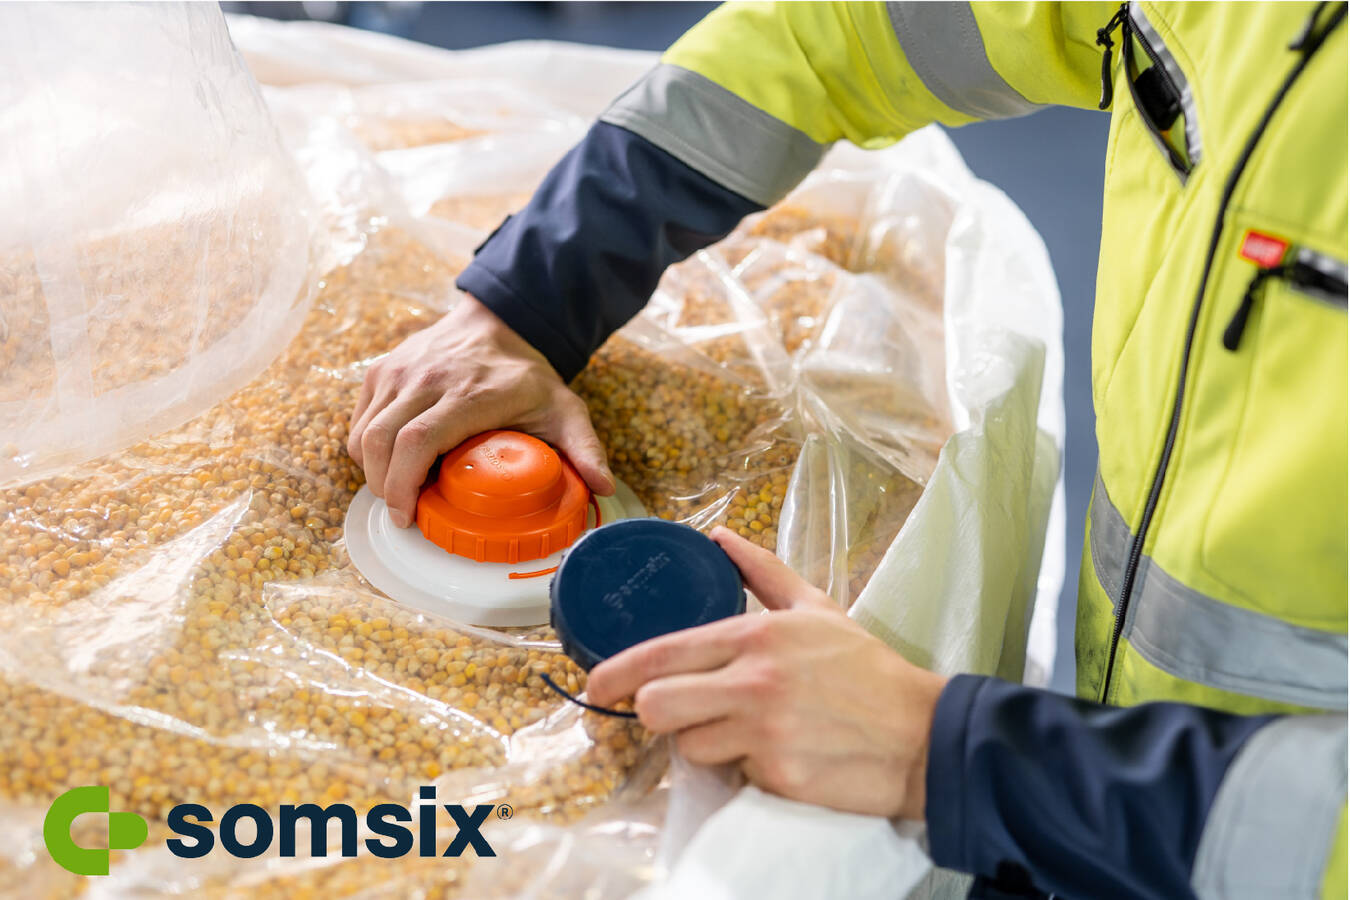 Prevent waste with Somsix sensors and smart monitoring  Masterpack and  Somsix developed  smart sensors for non-invasive monitoring the closed environment (Modified Atmosphere) inside big bags.